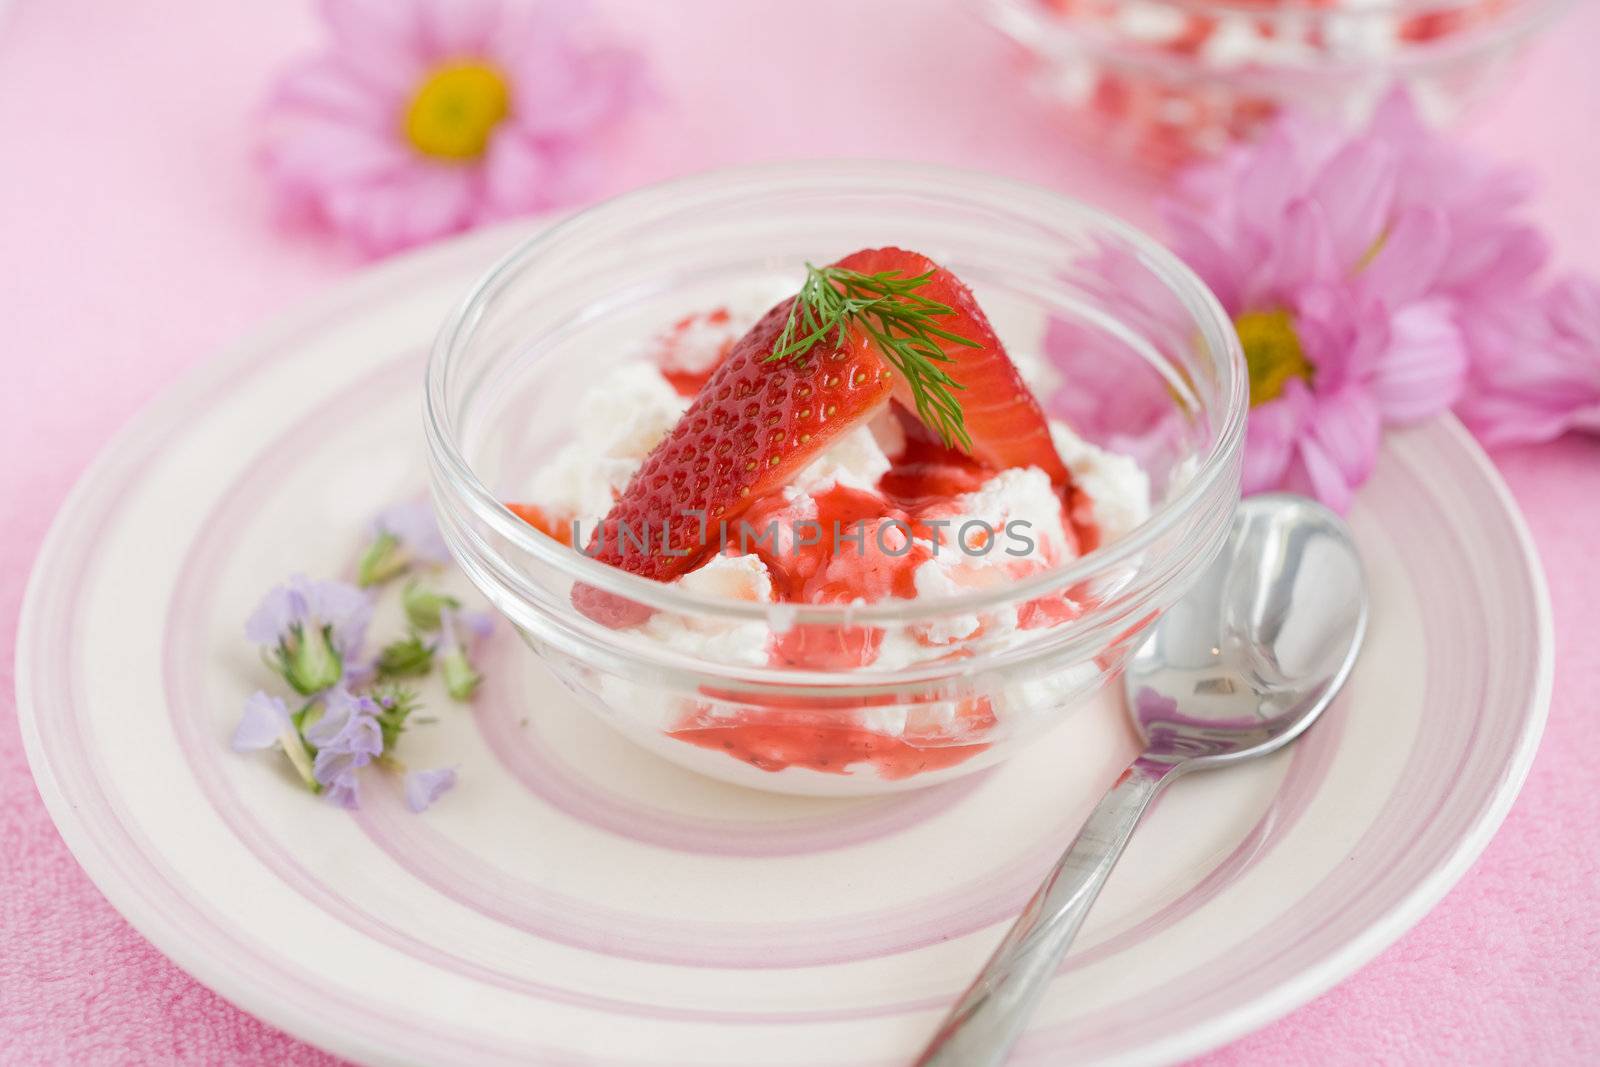 Delicious dessert with strawberries and flowers